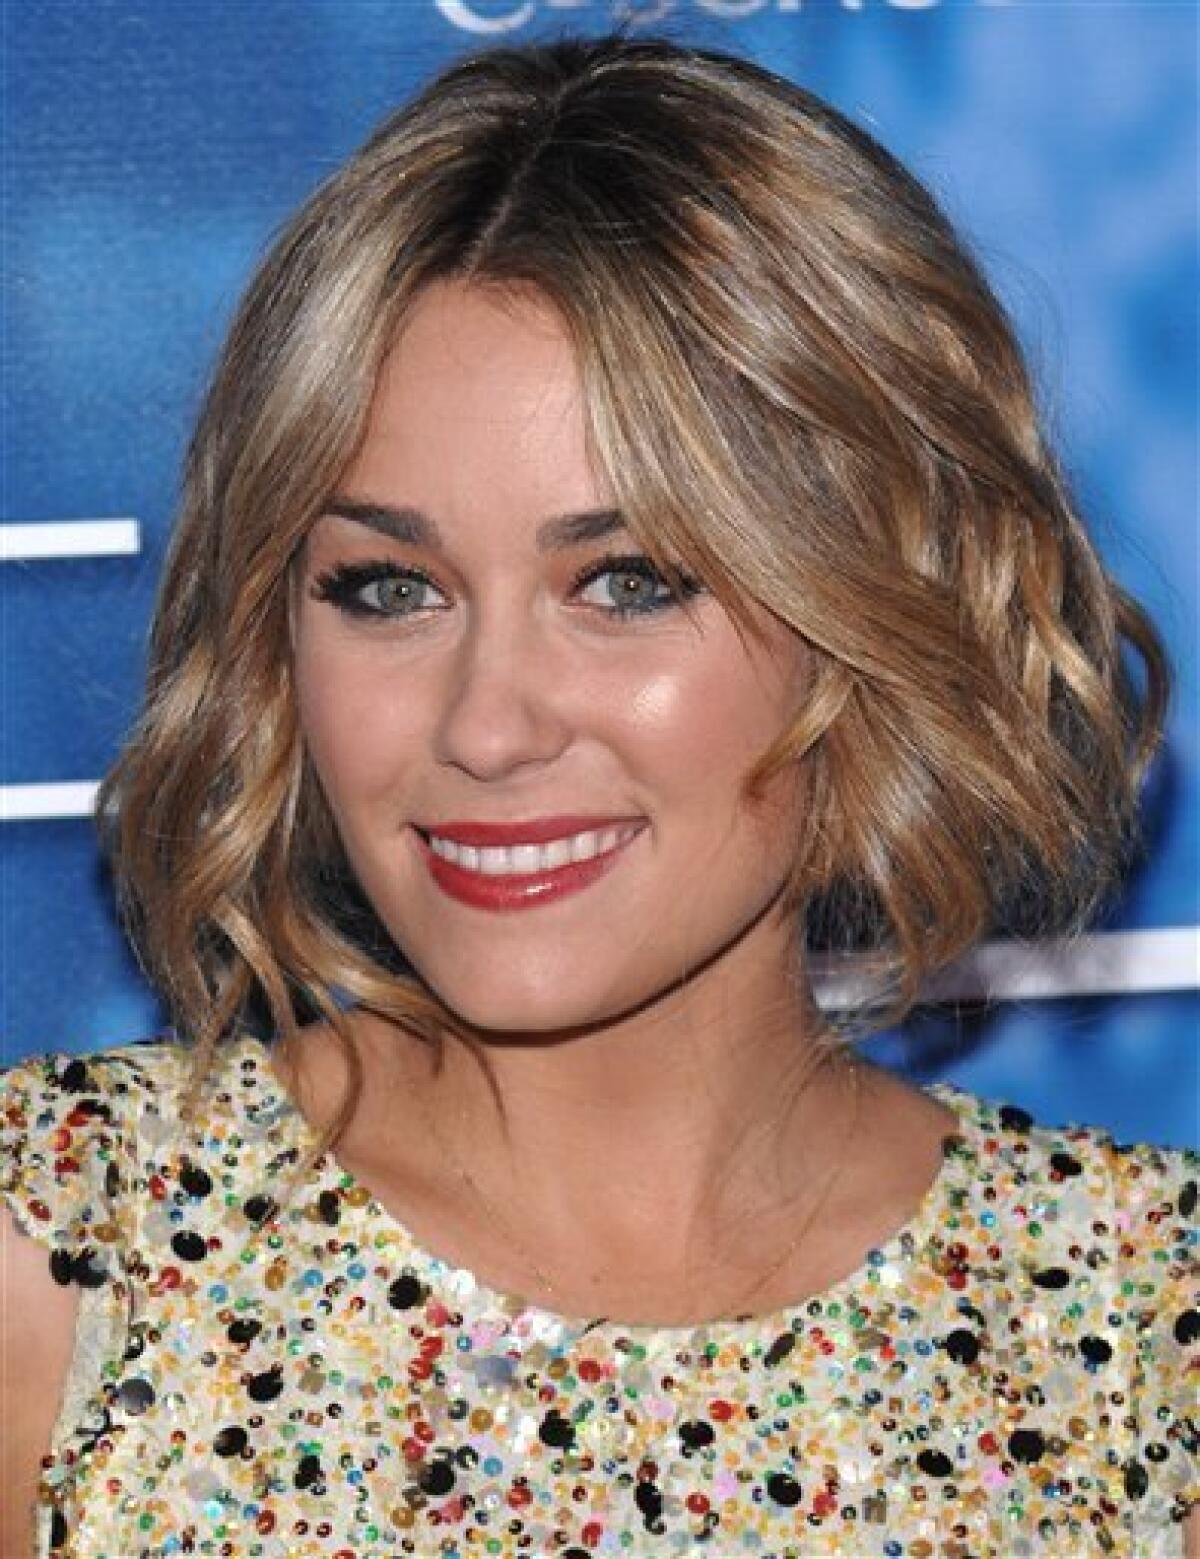 10 Things Lauren Conrad Has Done Since Leaving 'The Hills